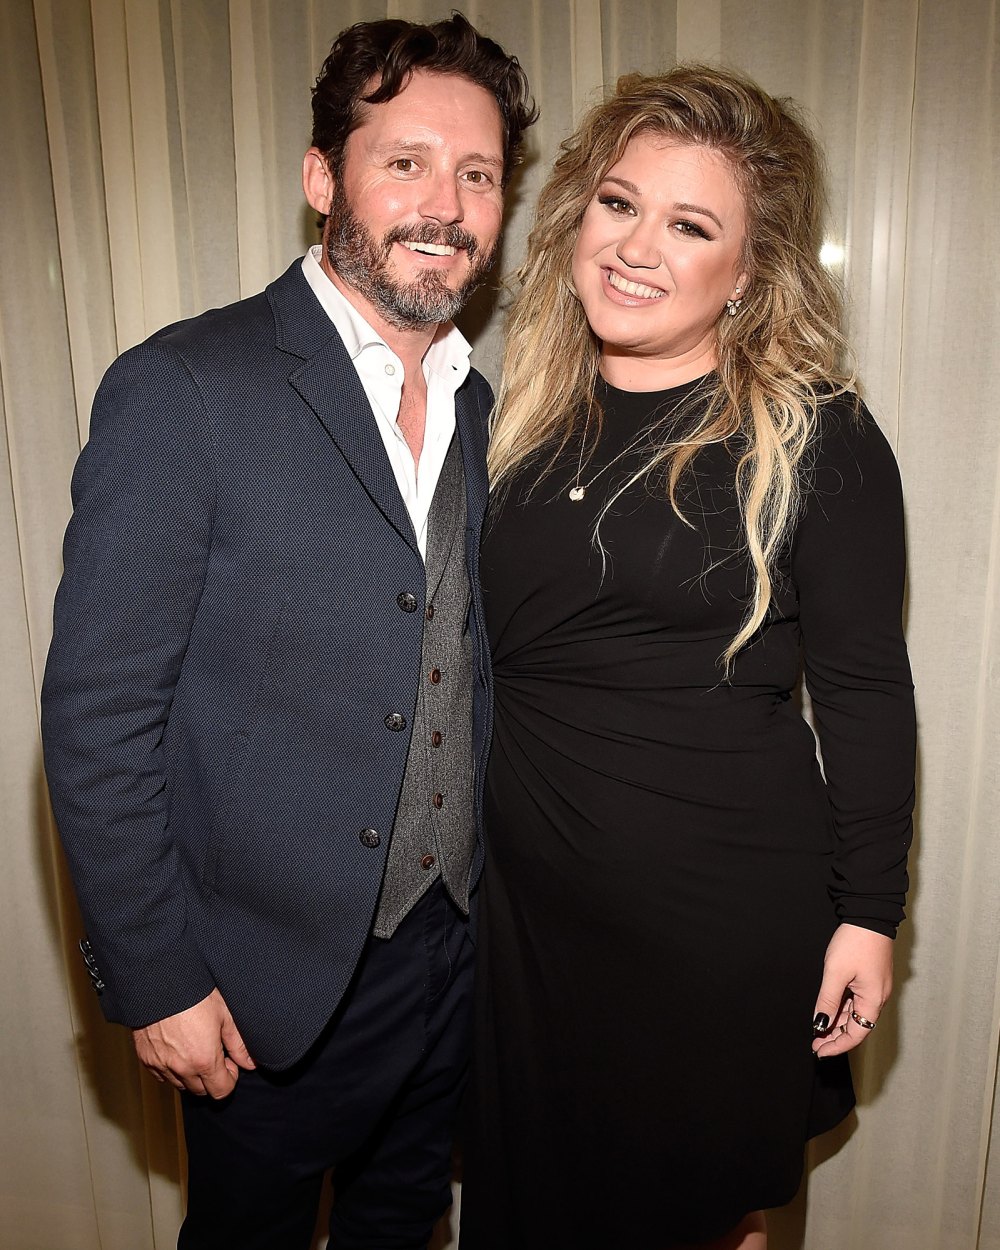 Kelly Clarkson Says She ‘Never Wanted to Get Married’ Before Brandon Blackstock Divorce